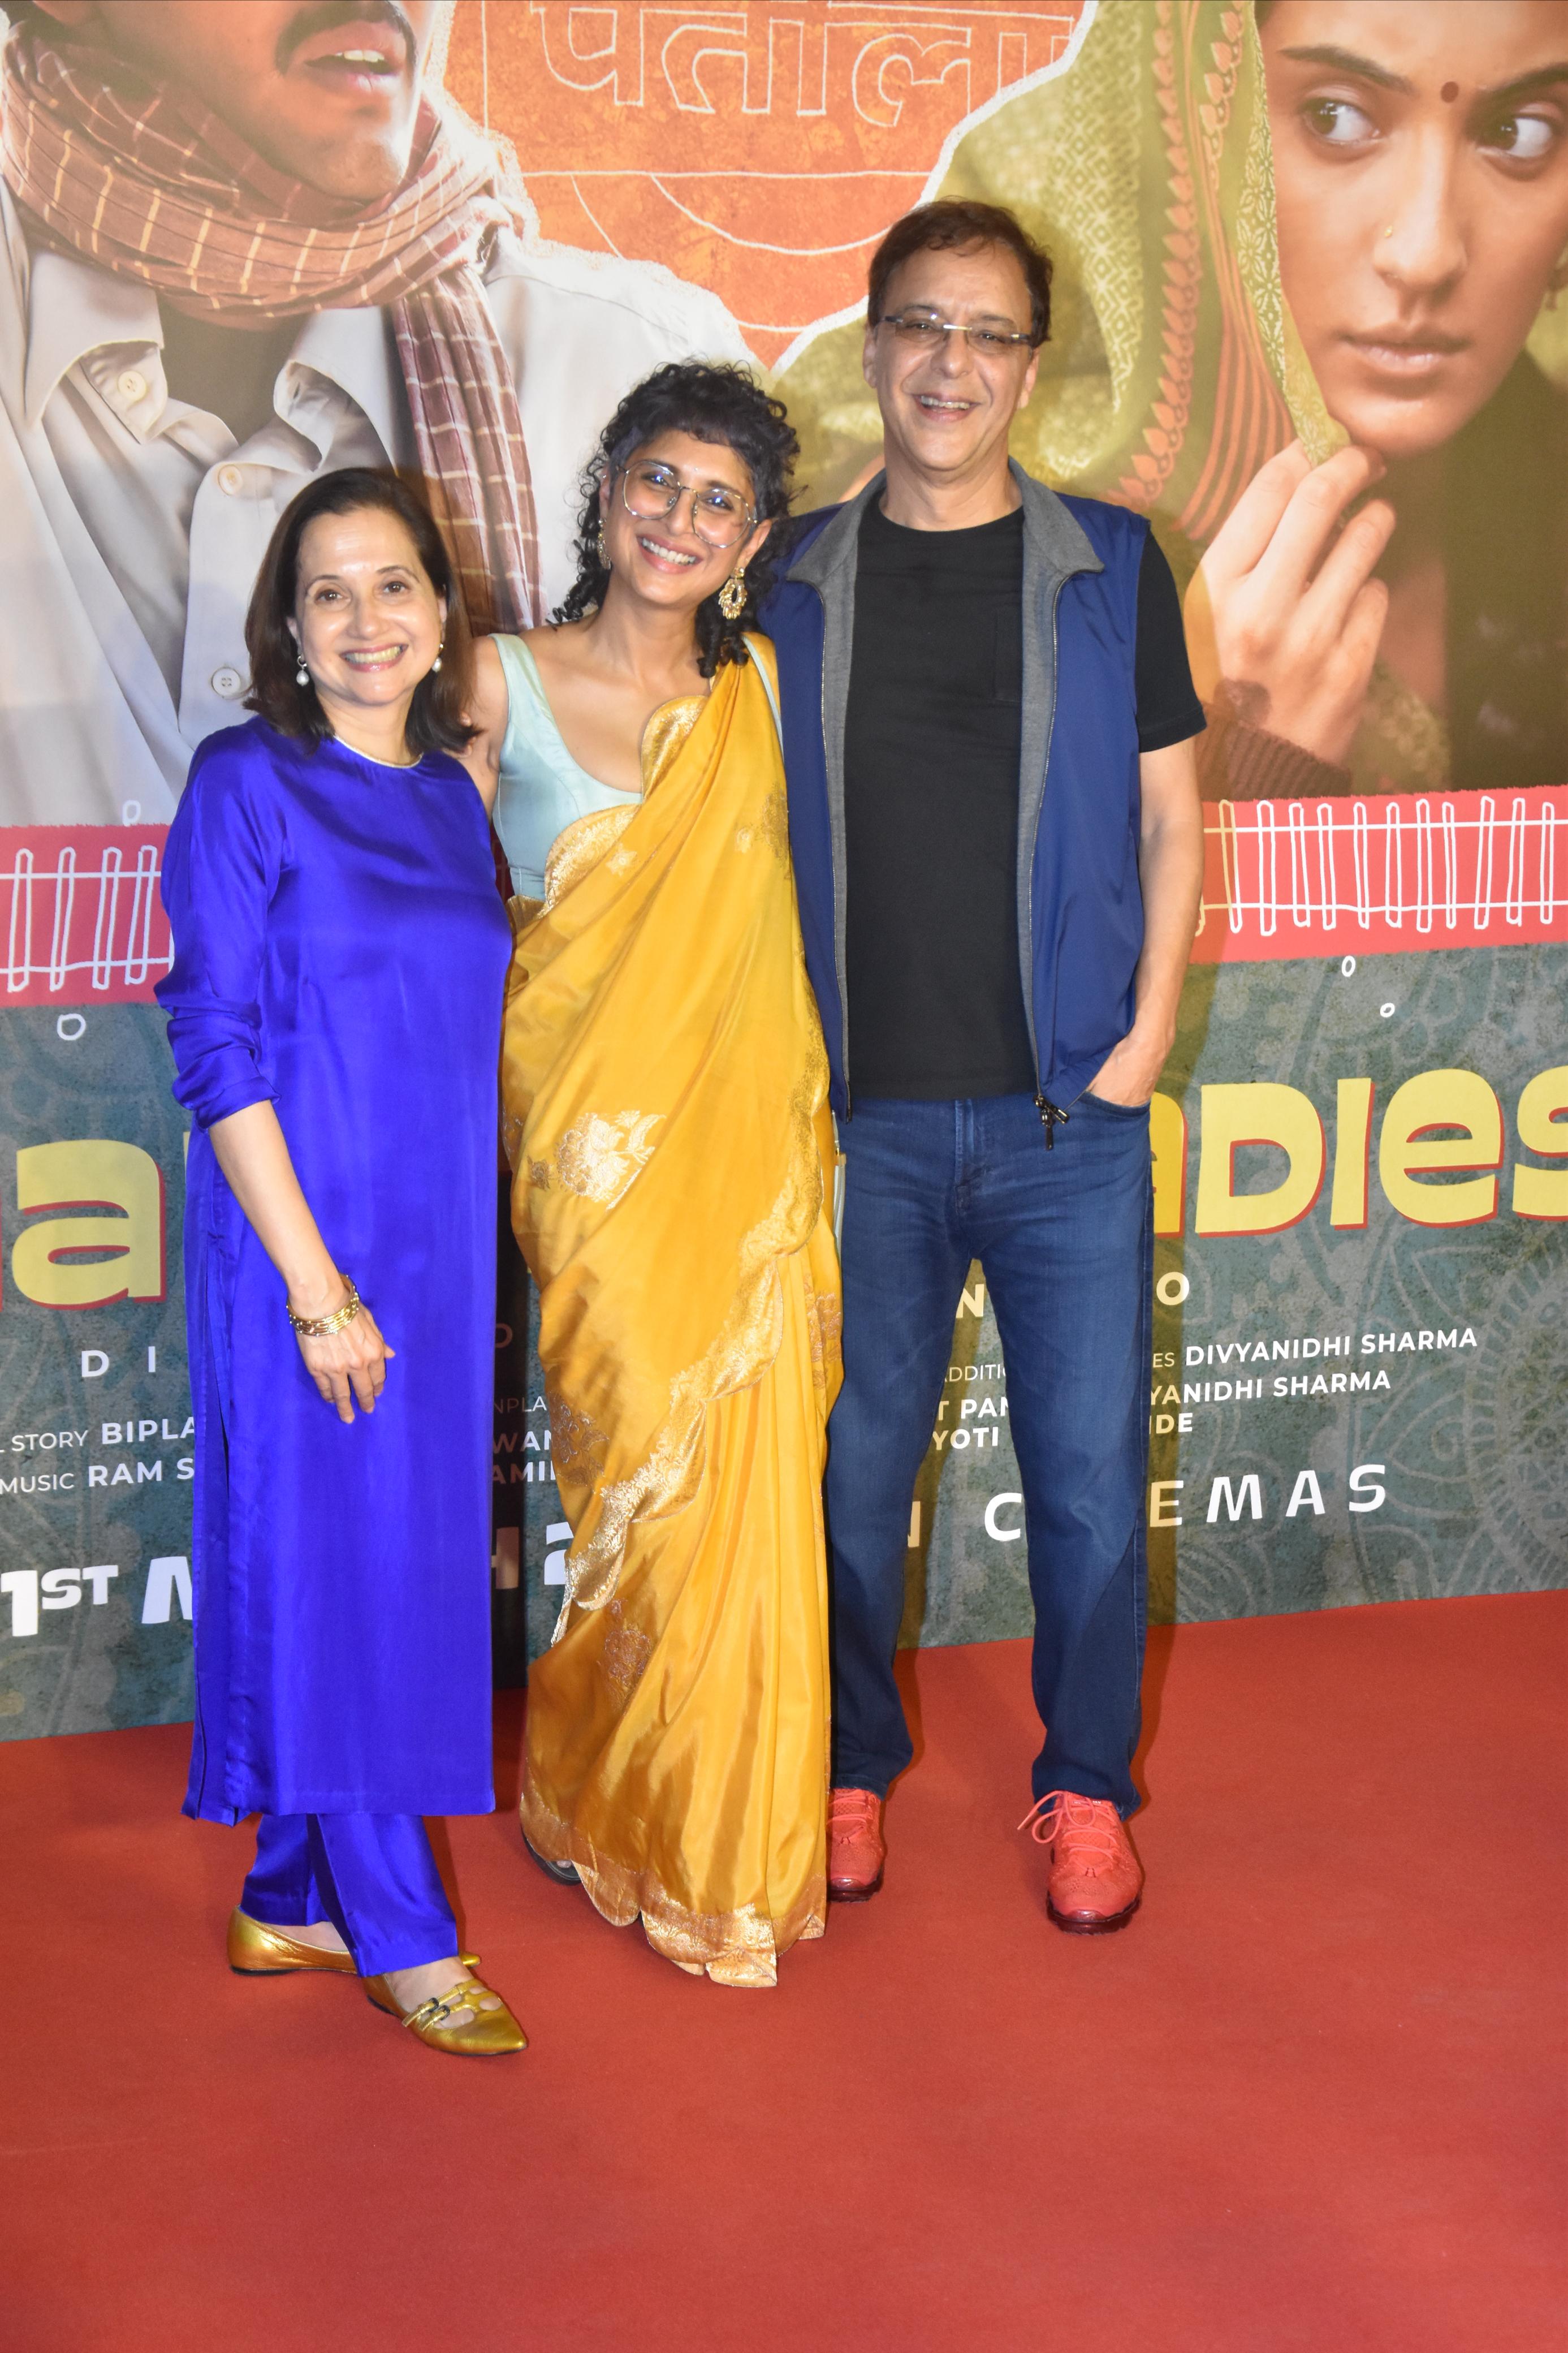 Vidhu Vinod Chopra and his wife Anupama Chopra also attended the special premier of the film